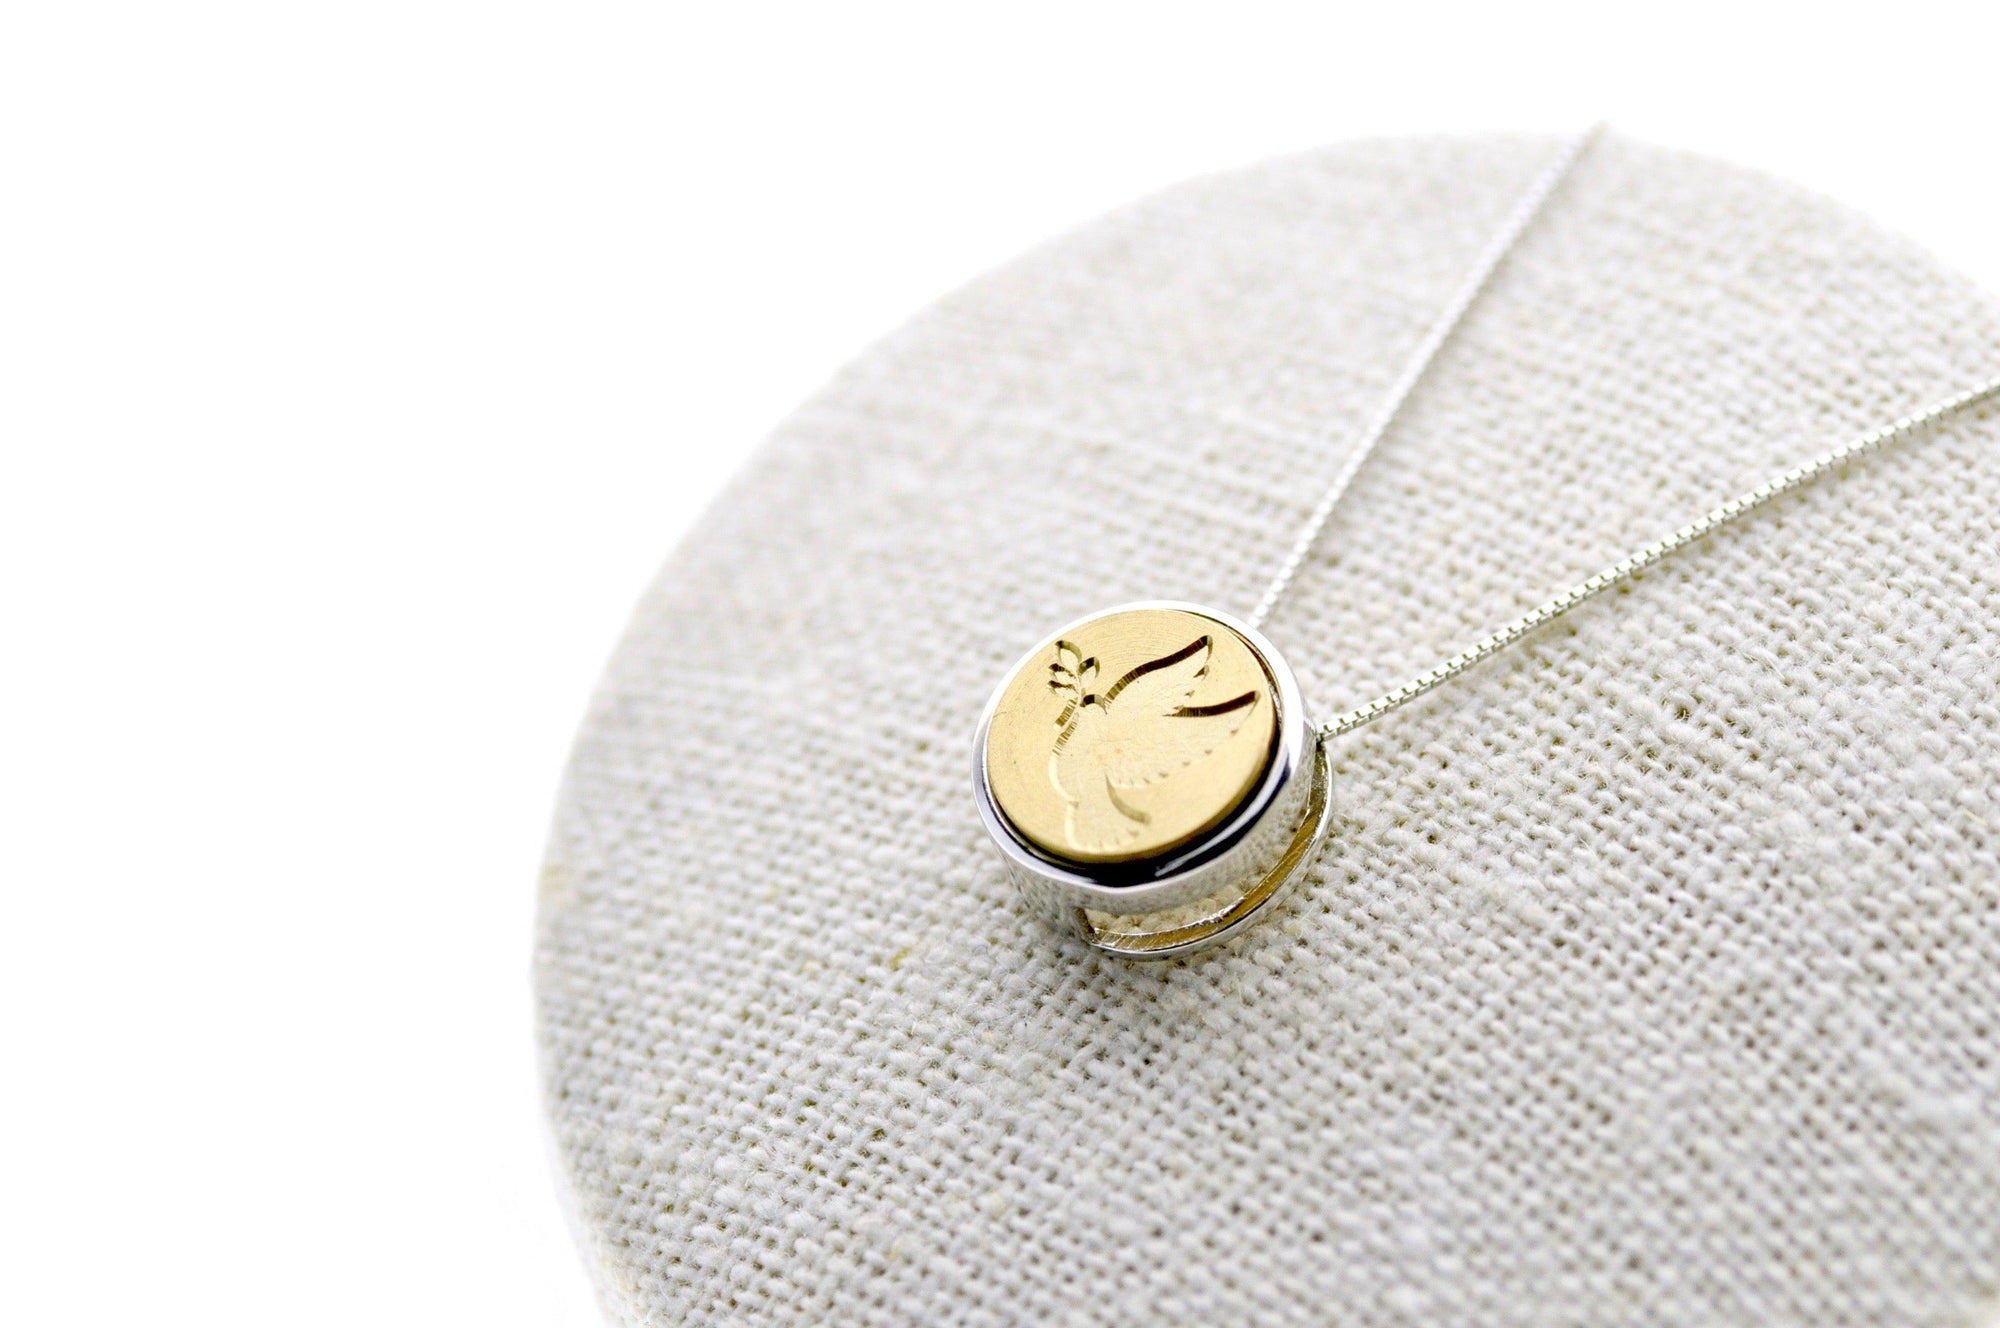 Dove Floating Signet Necklace - Backtozero B20 - 12mm, 12mm necklace, bead, bird, brass, charm, floating, minimal, minimalnecklace, necklace, peace, signet, signet necklace, silver